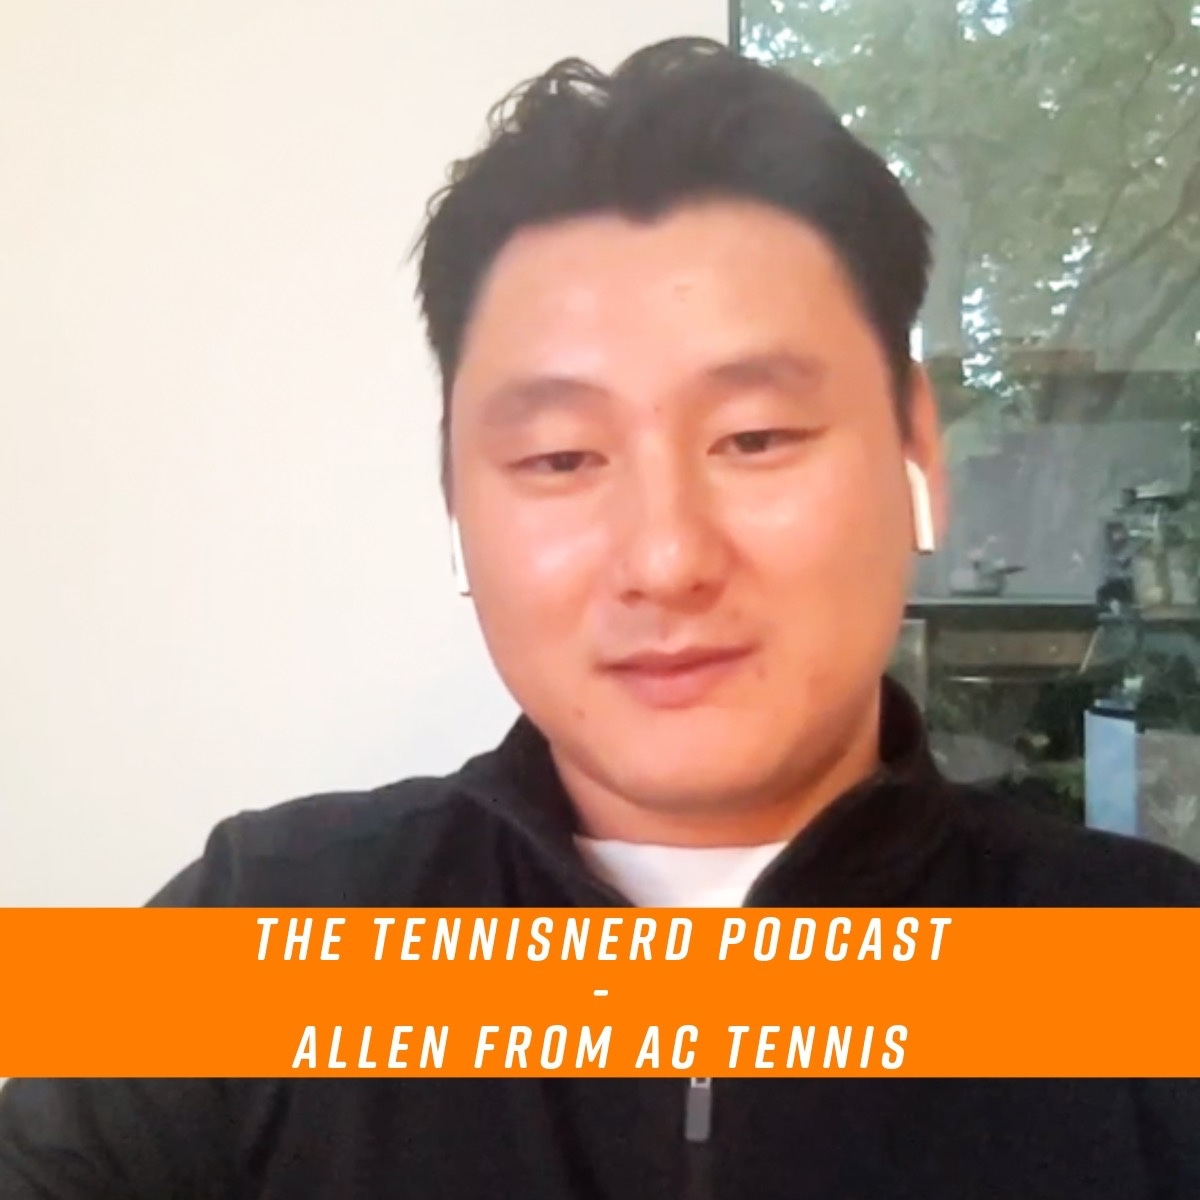 Allen from AC Tennis gets in-depth about racquets